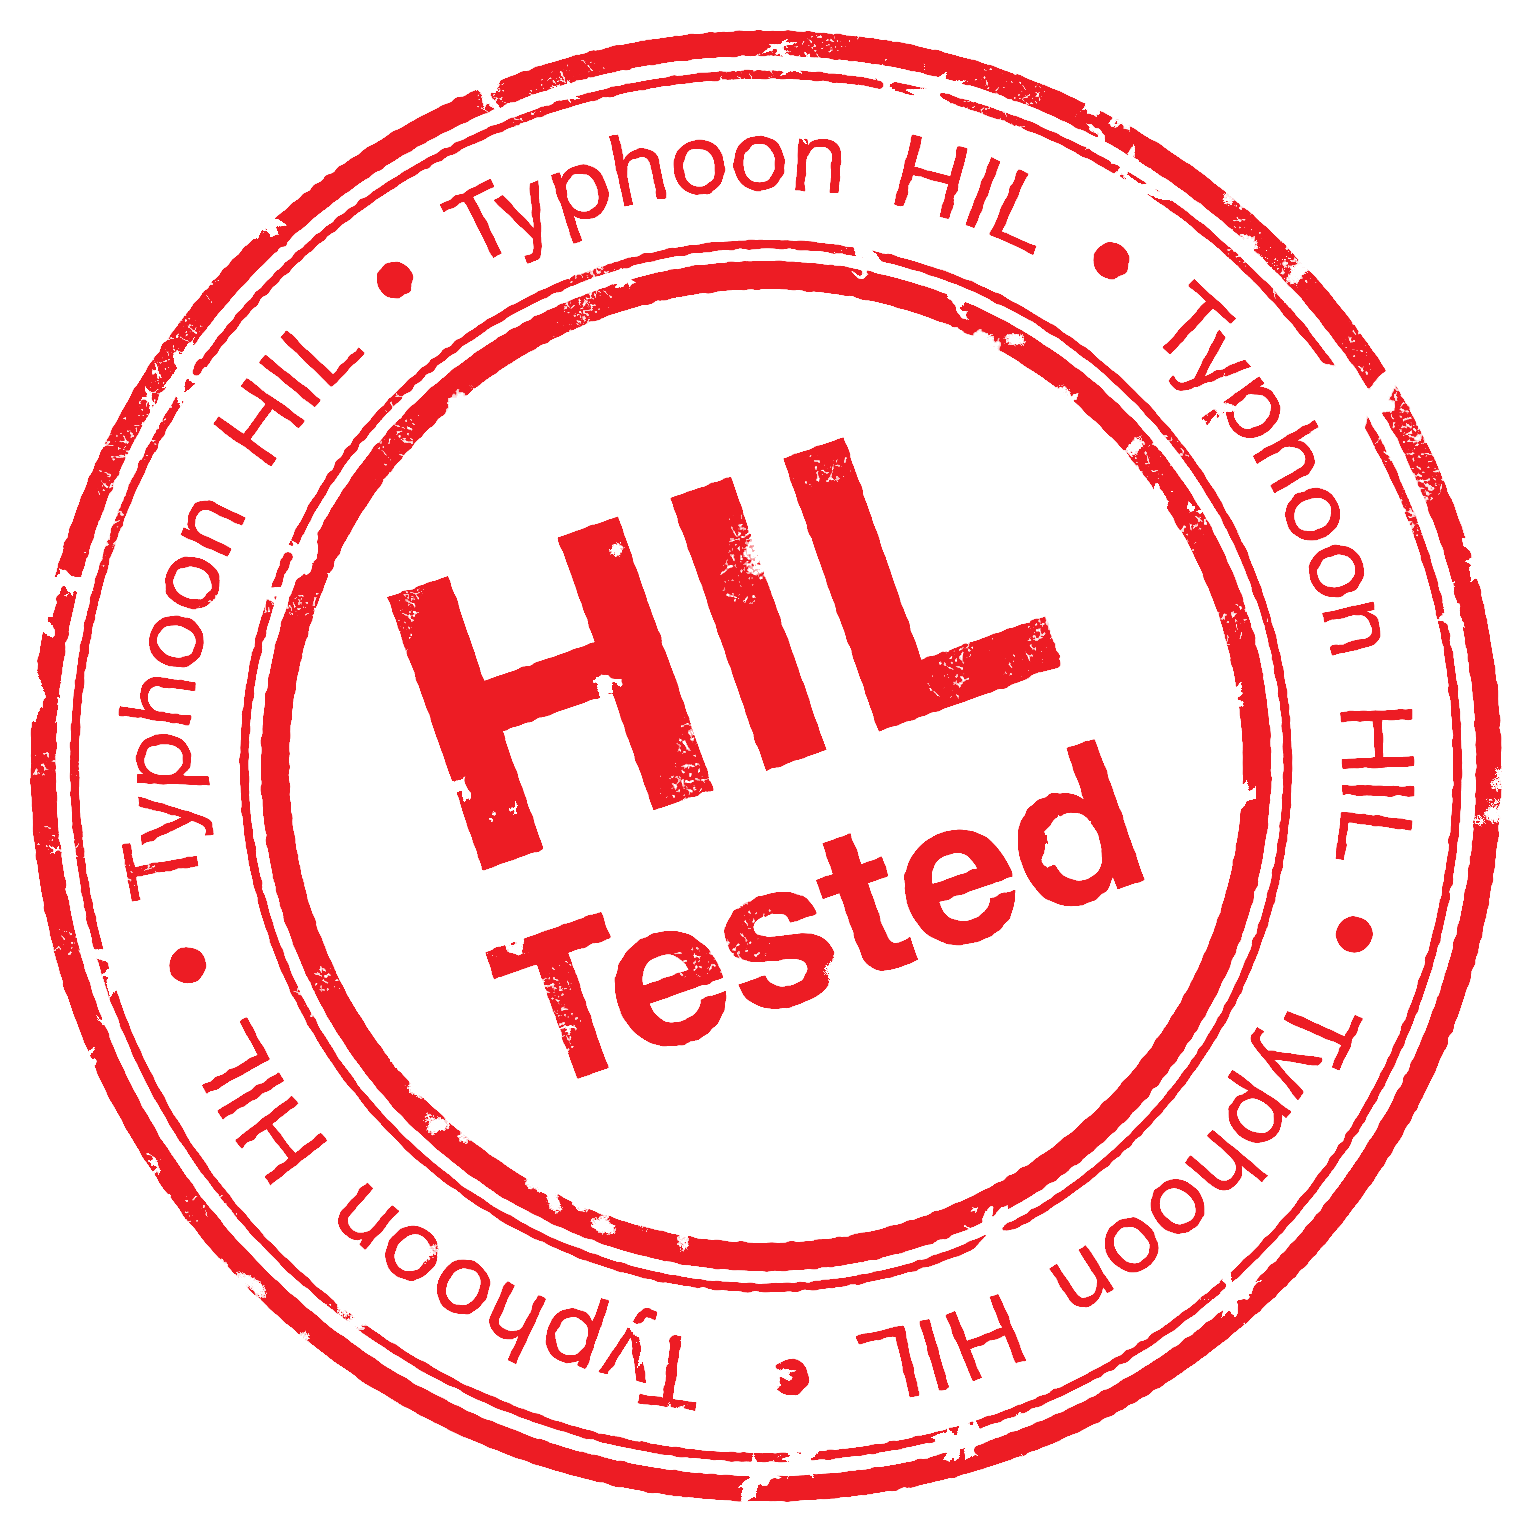 HIL Tested: Powerful Performance, Functionality and Quality from Model-Based Testing